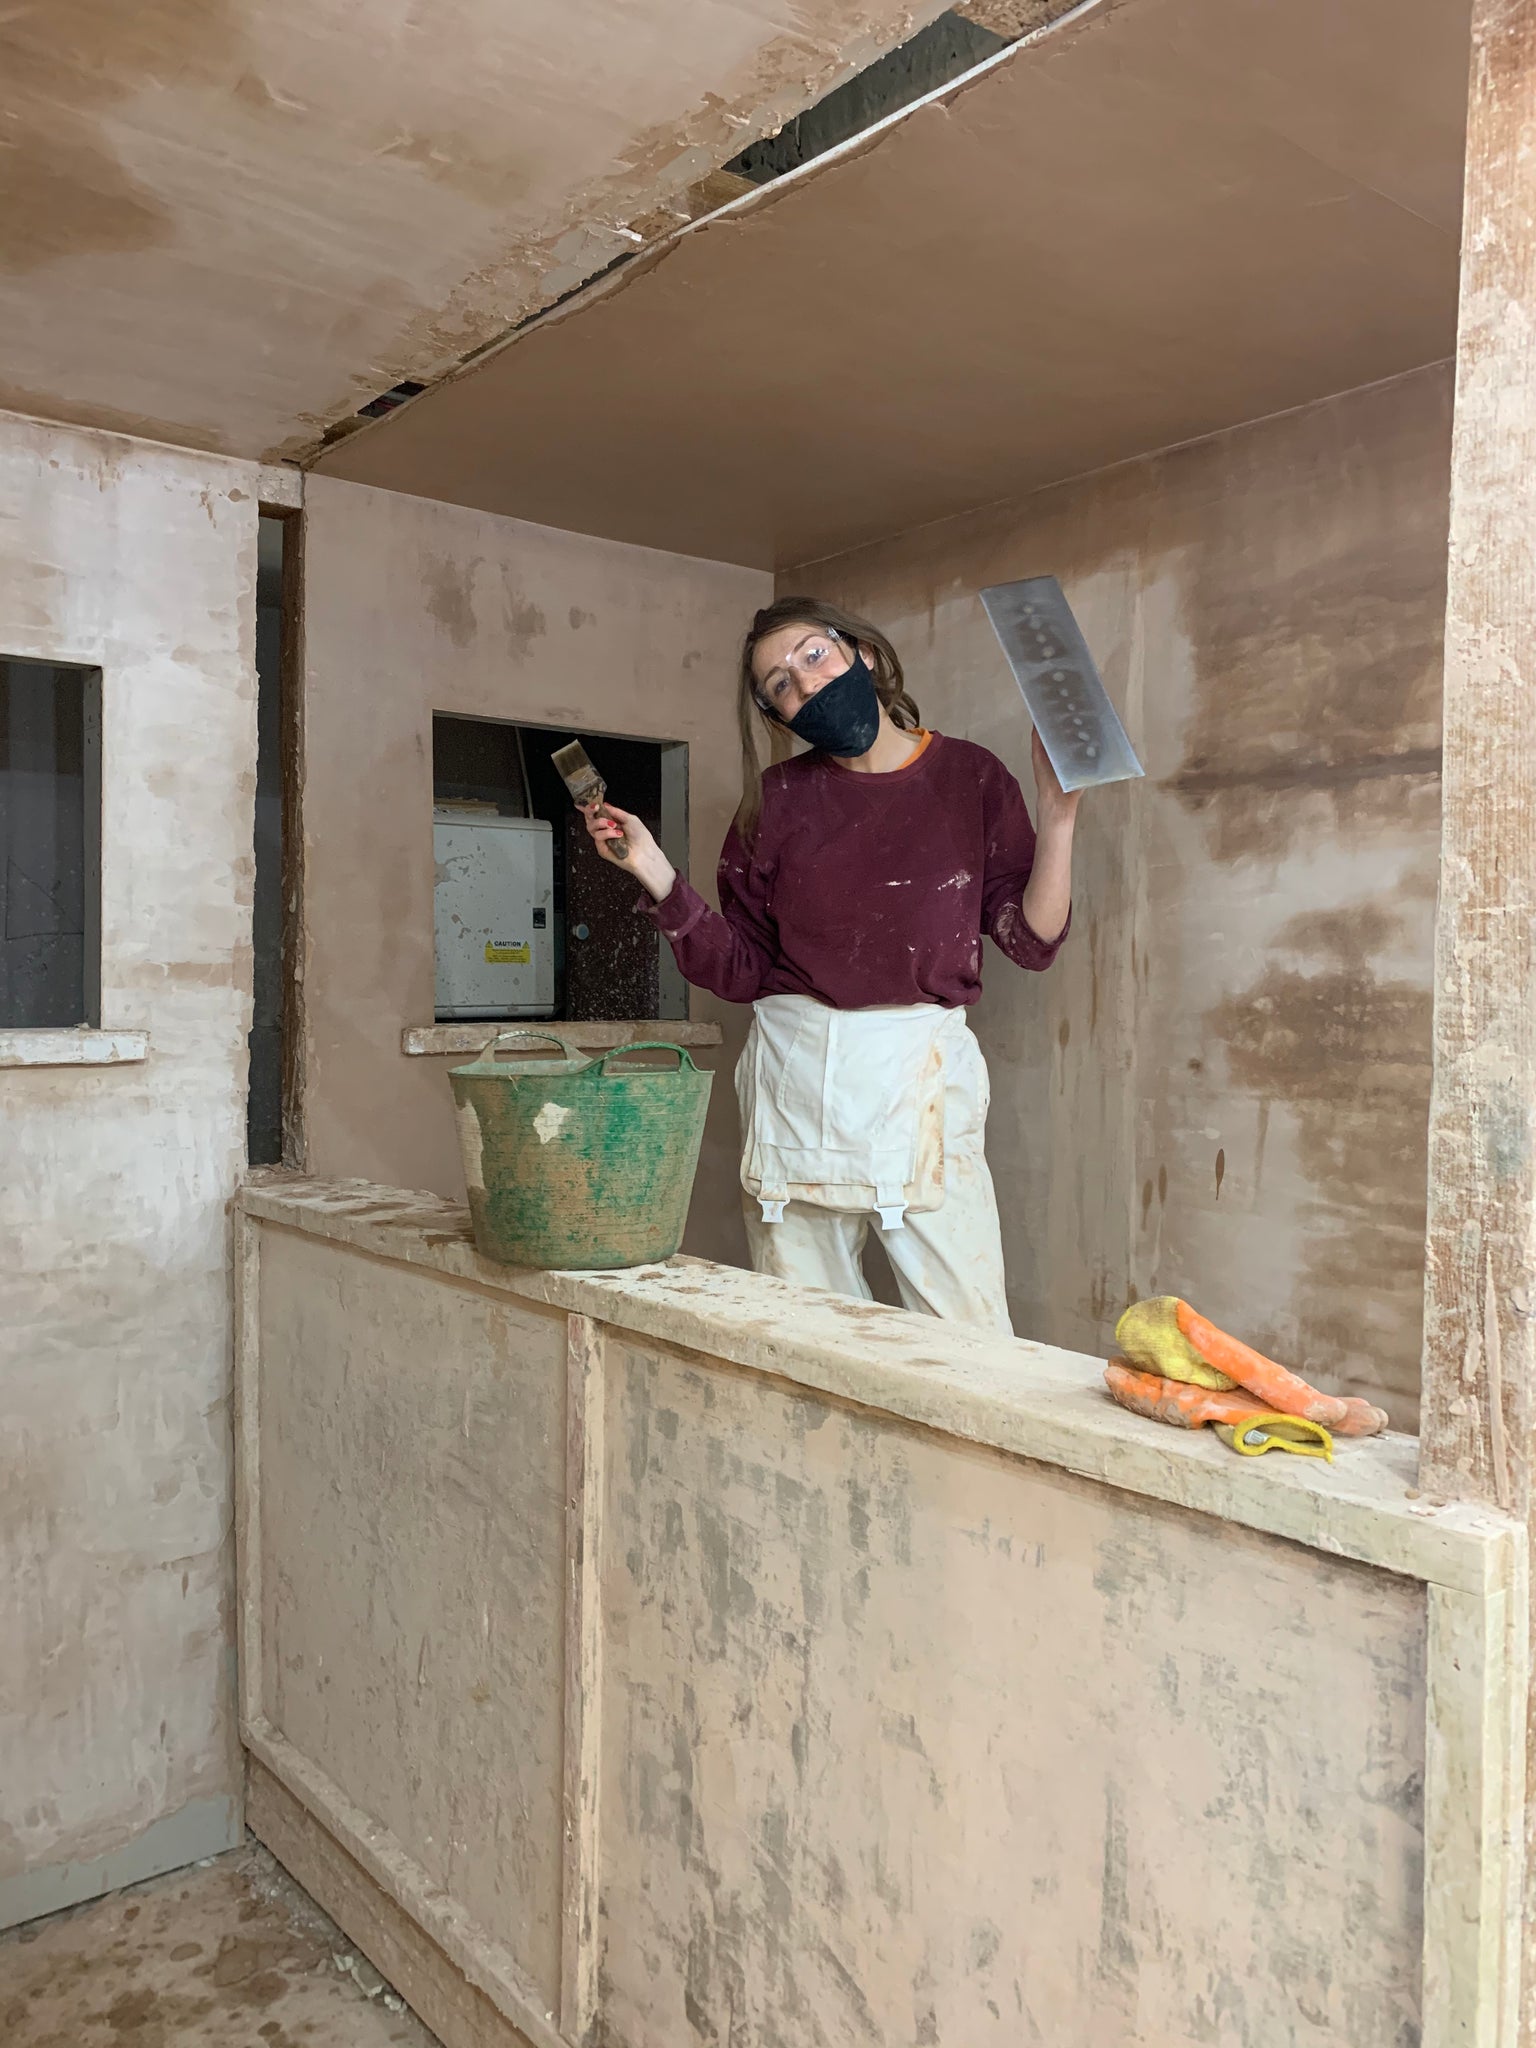 Plastering Girls and Boys